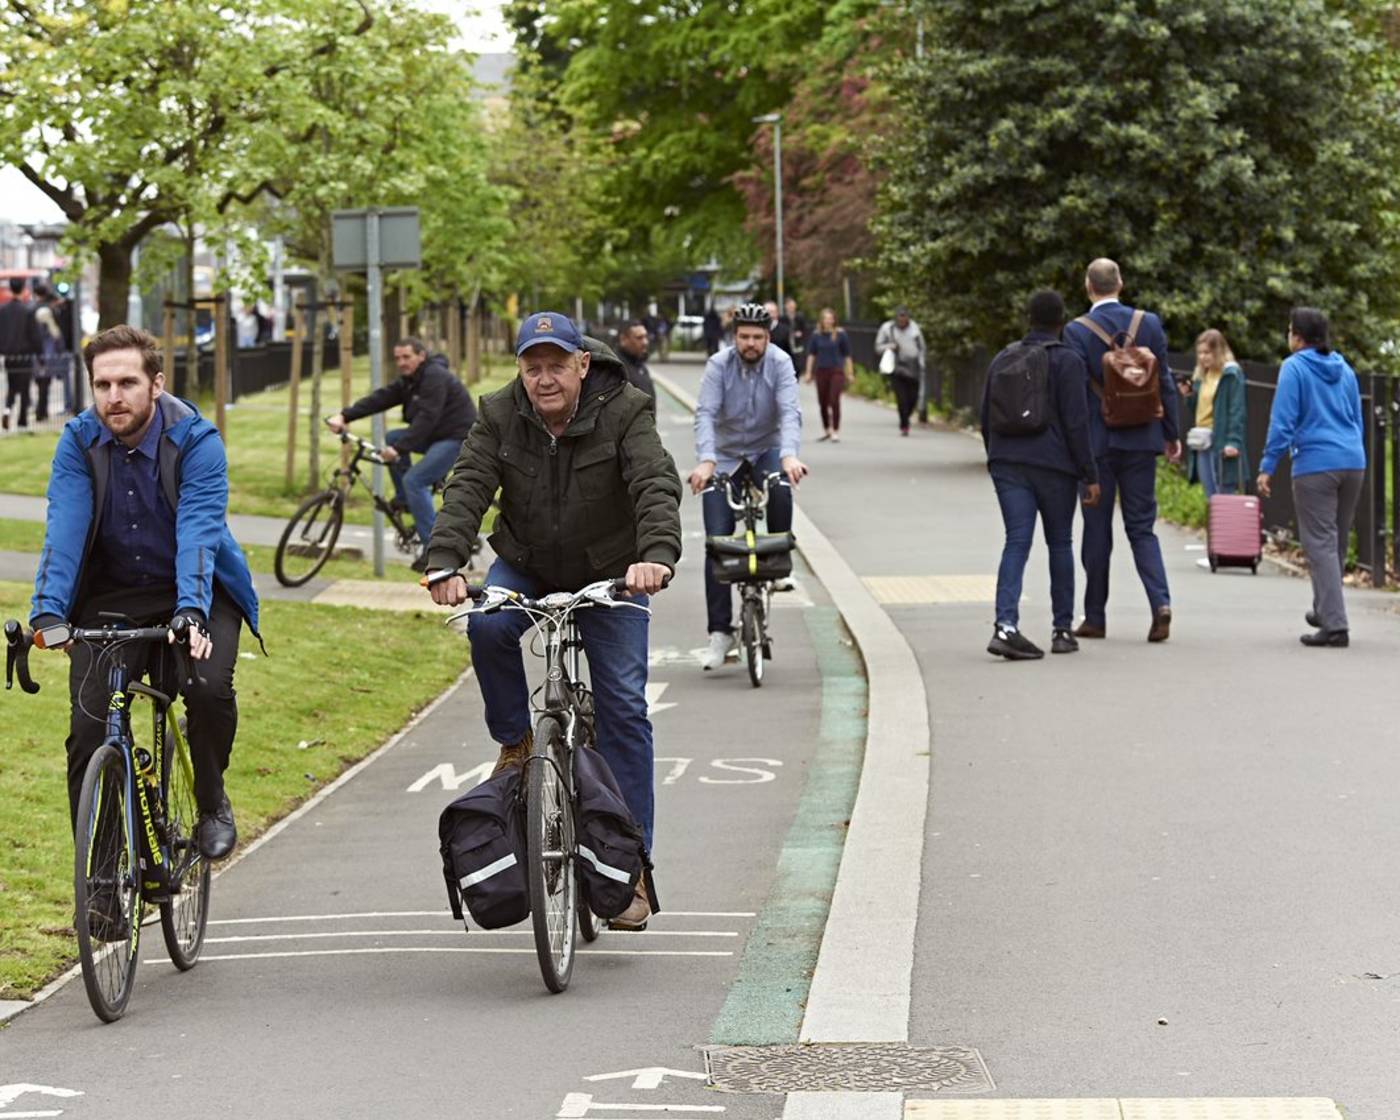 An image of a street with multiple people cycling in the cycle lane